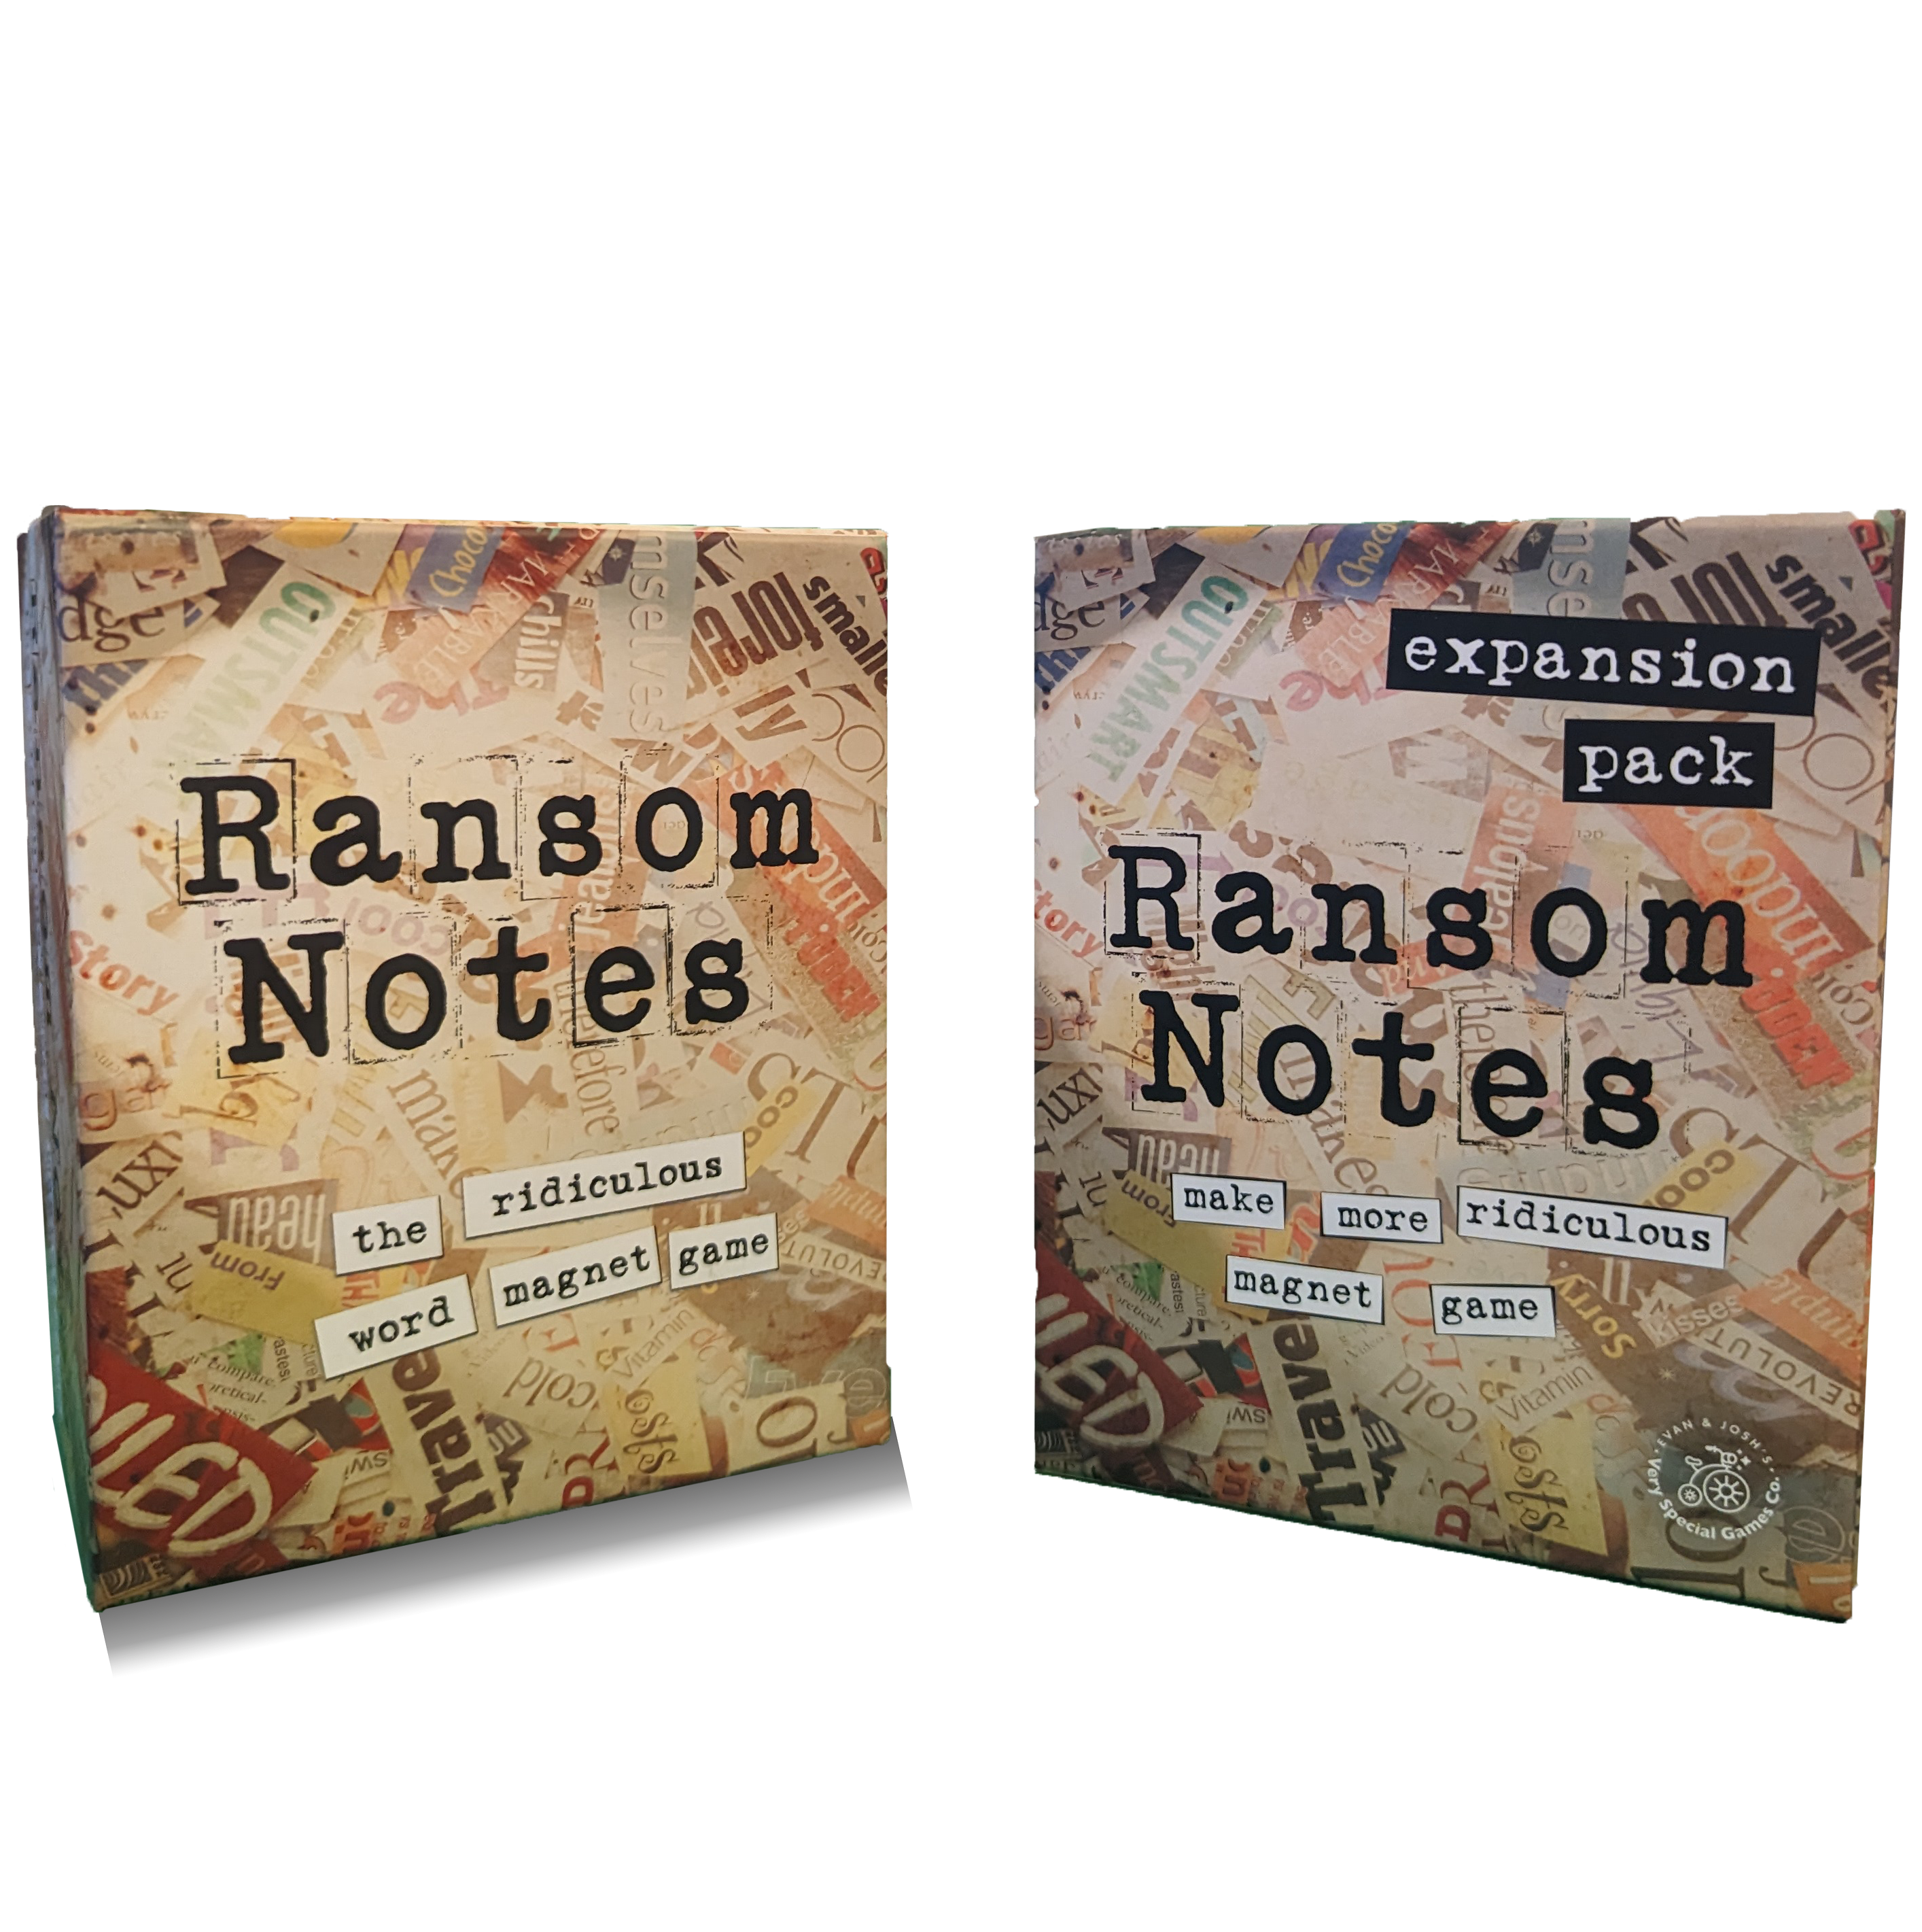 Very Special Games - Ransom Notes Original + Expansion Pack Bundle! - Bards & Cards